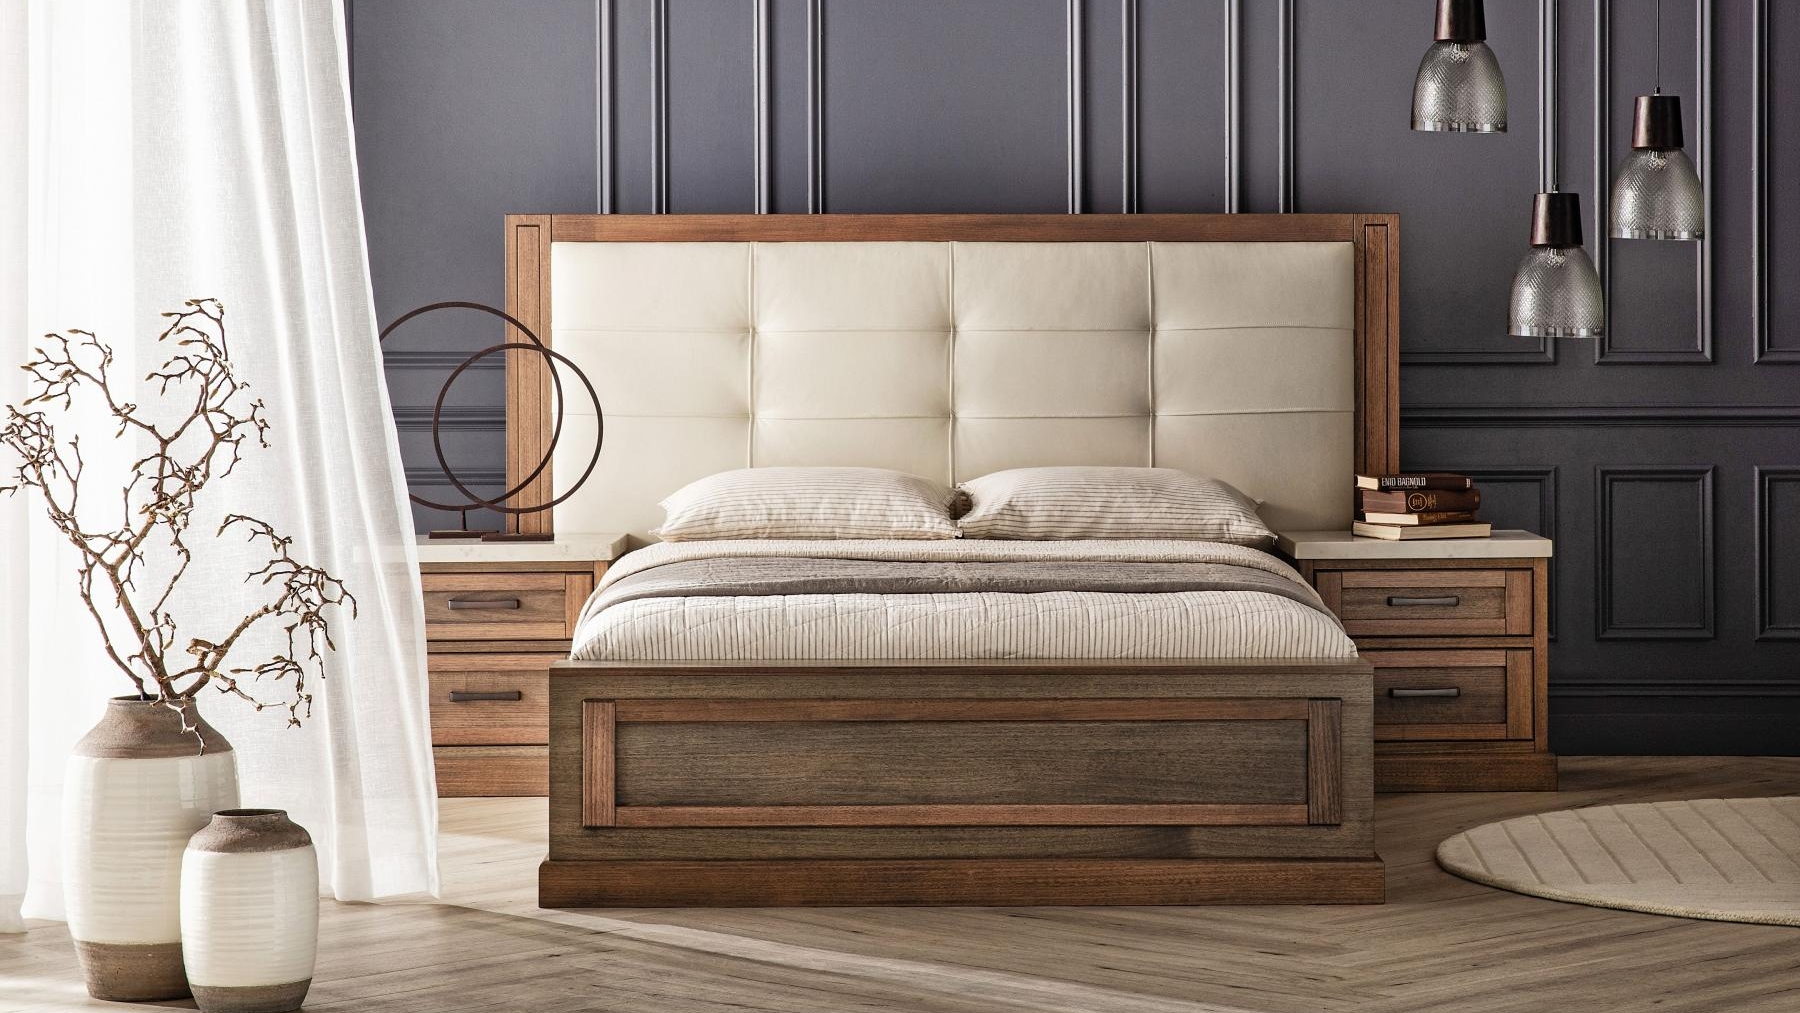 Hamptons Bed Frame With Bedhead, King Size Bed Suite Australia